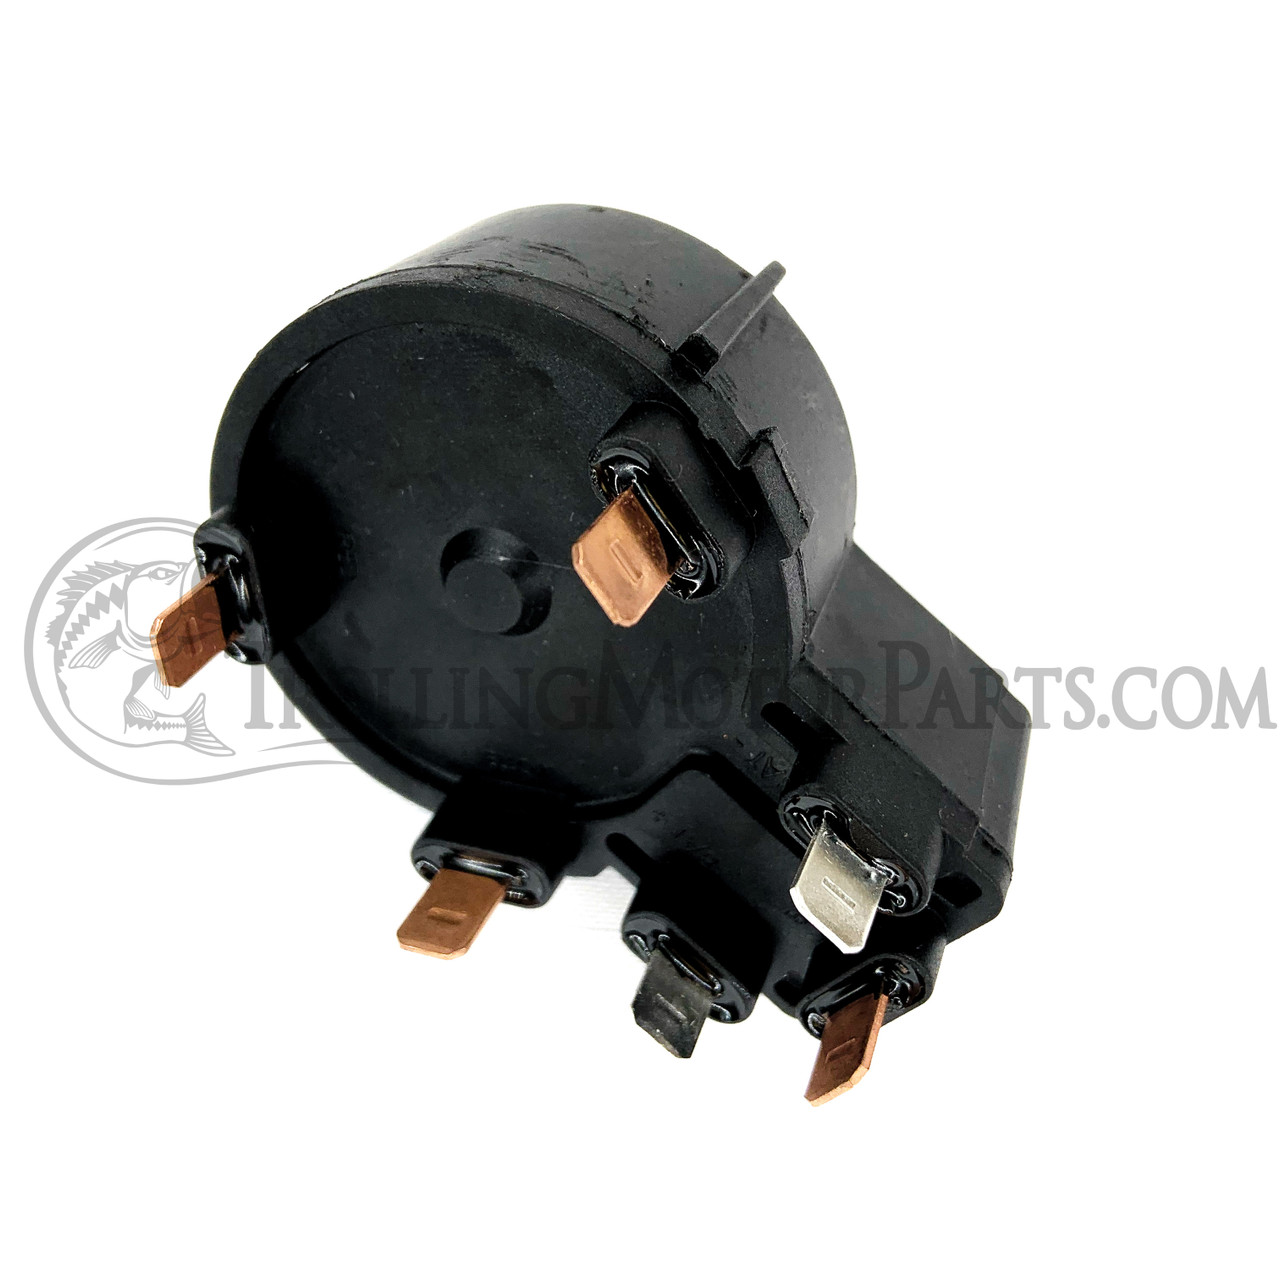 ElectricTrolling Motor Switch 5 Speed 12V Switch for Vector Turbo Electric Motor Accessories